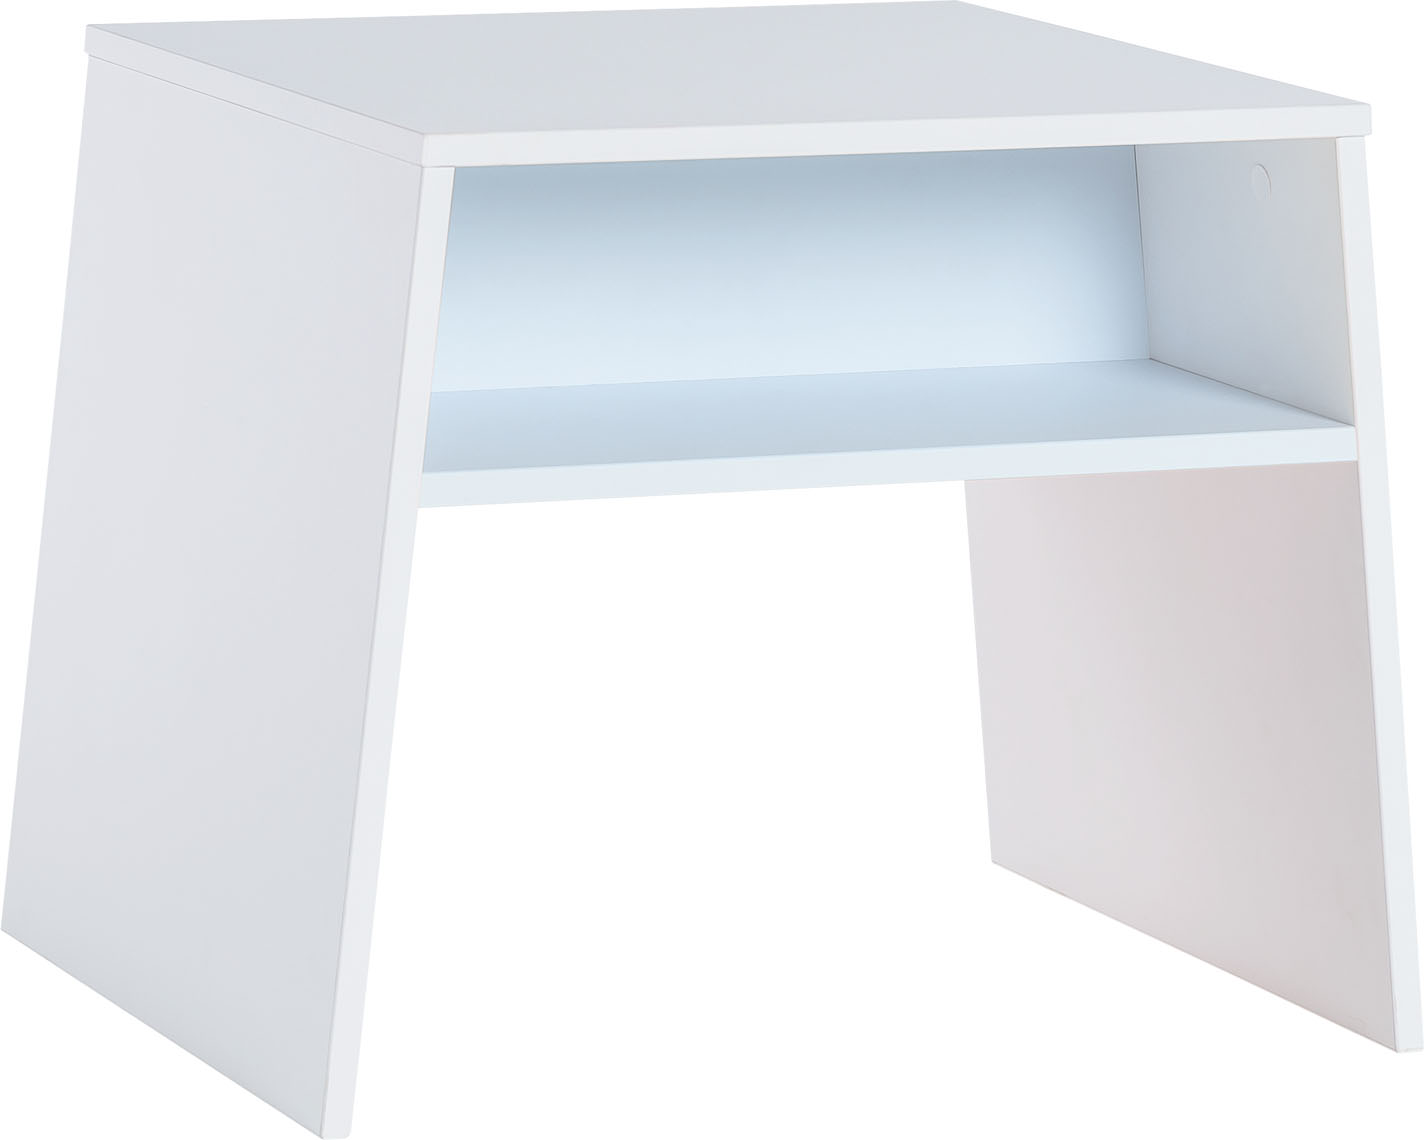 Table in white/blue colour